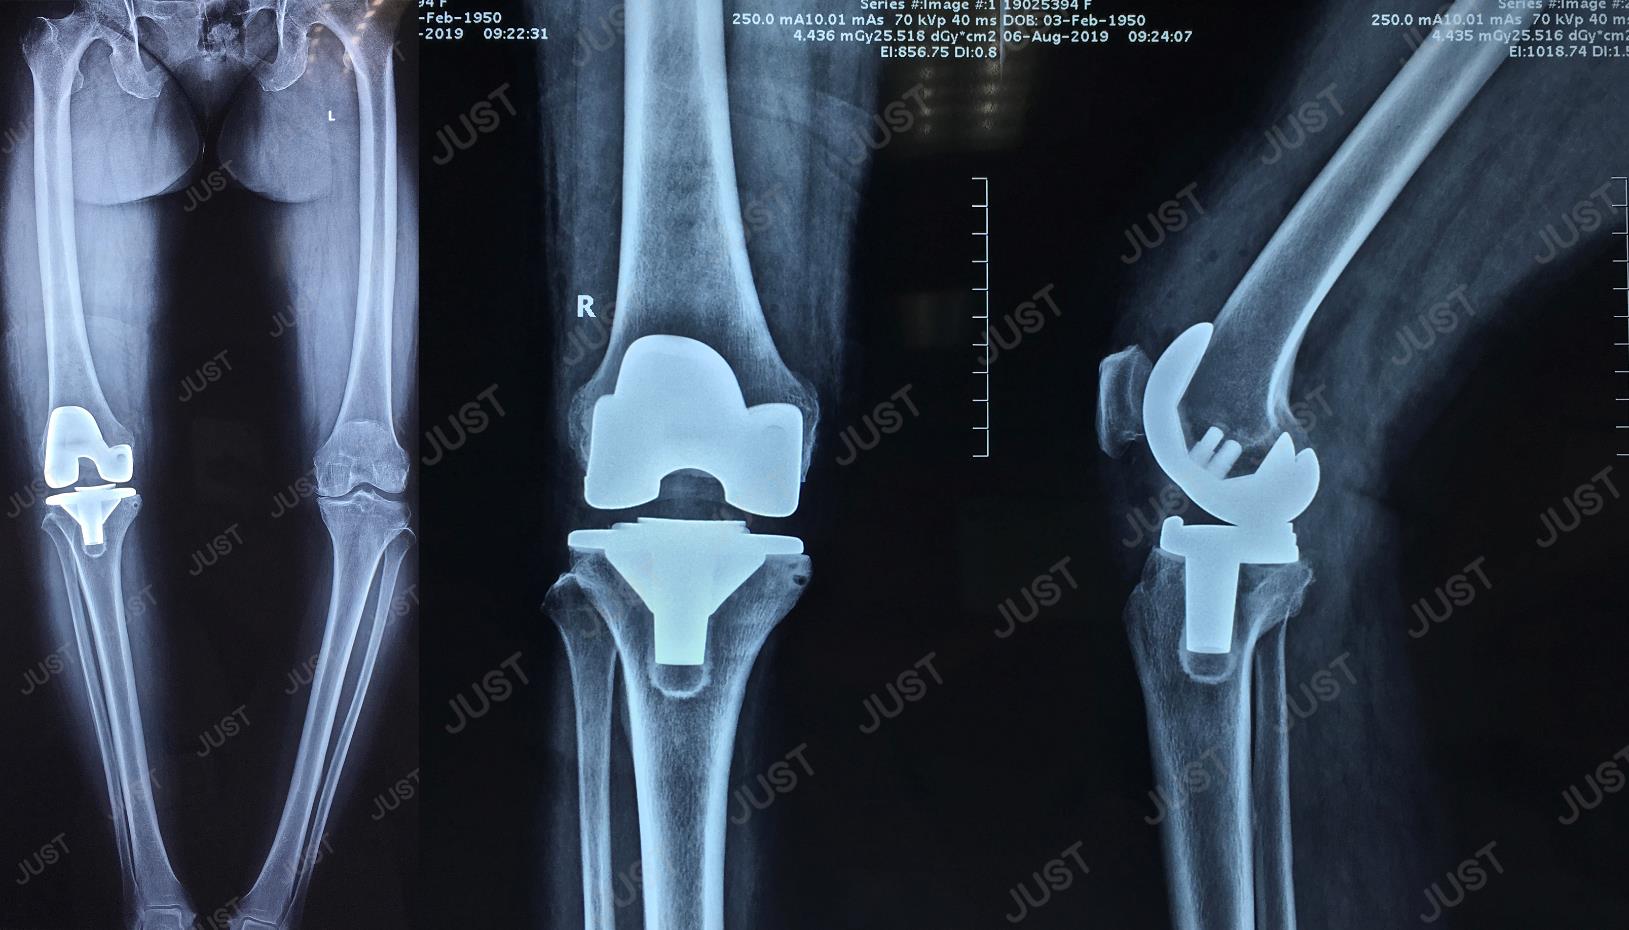 Case of SKII CR High Flexion Total Knee System